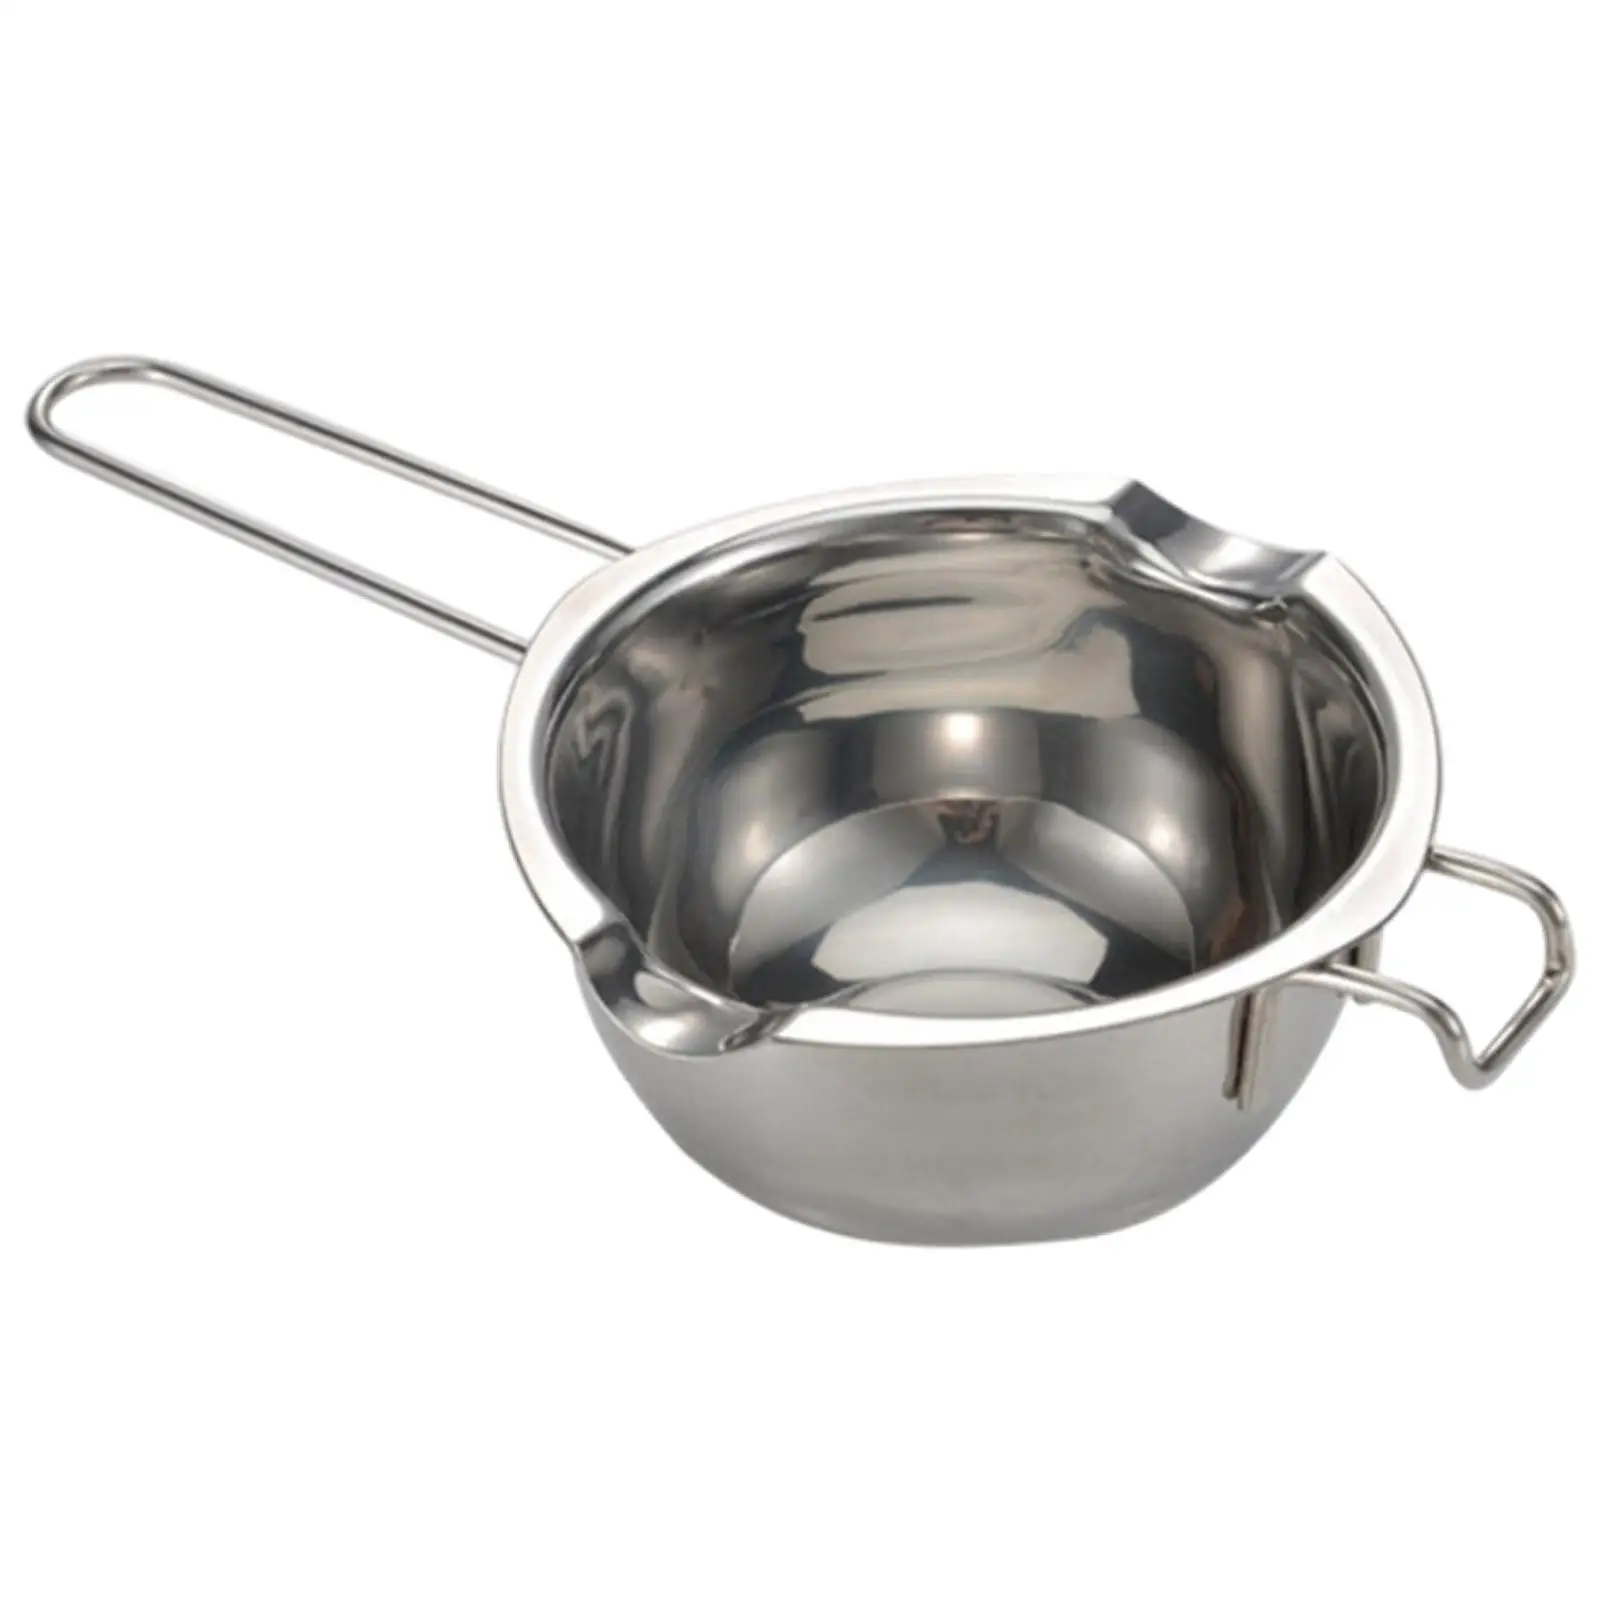 Stainless Steel Double Boiler Metls Pot 600ml for Melting Butter,Candle 20oz Capacity